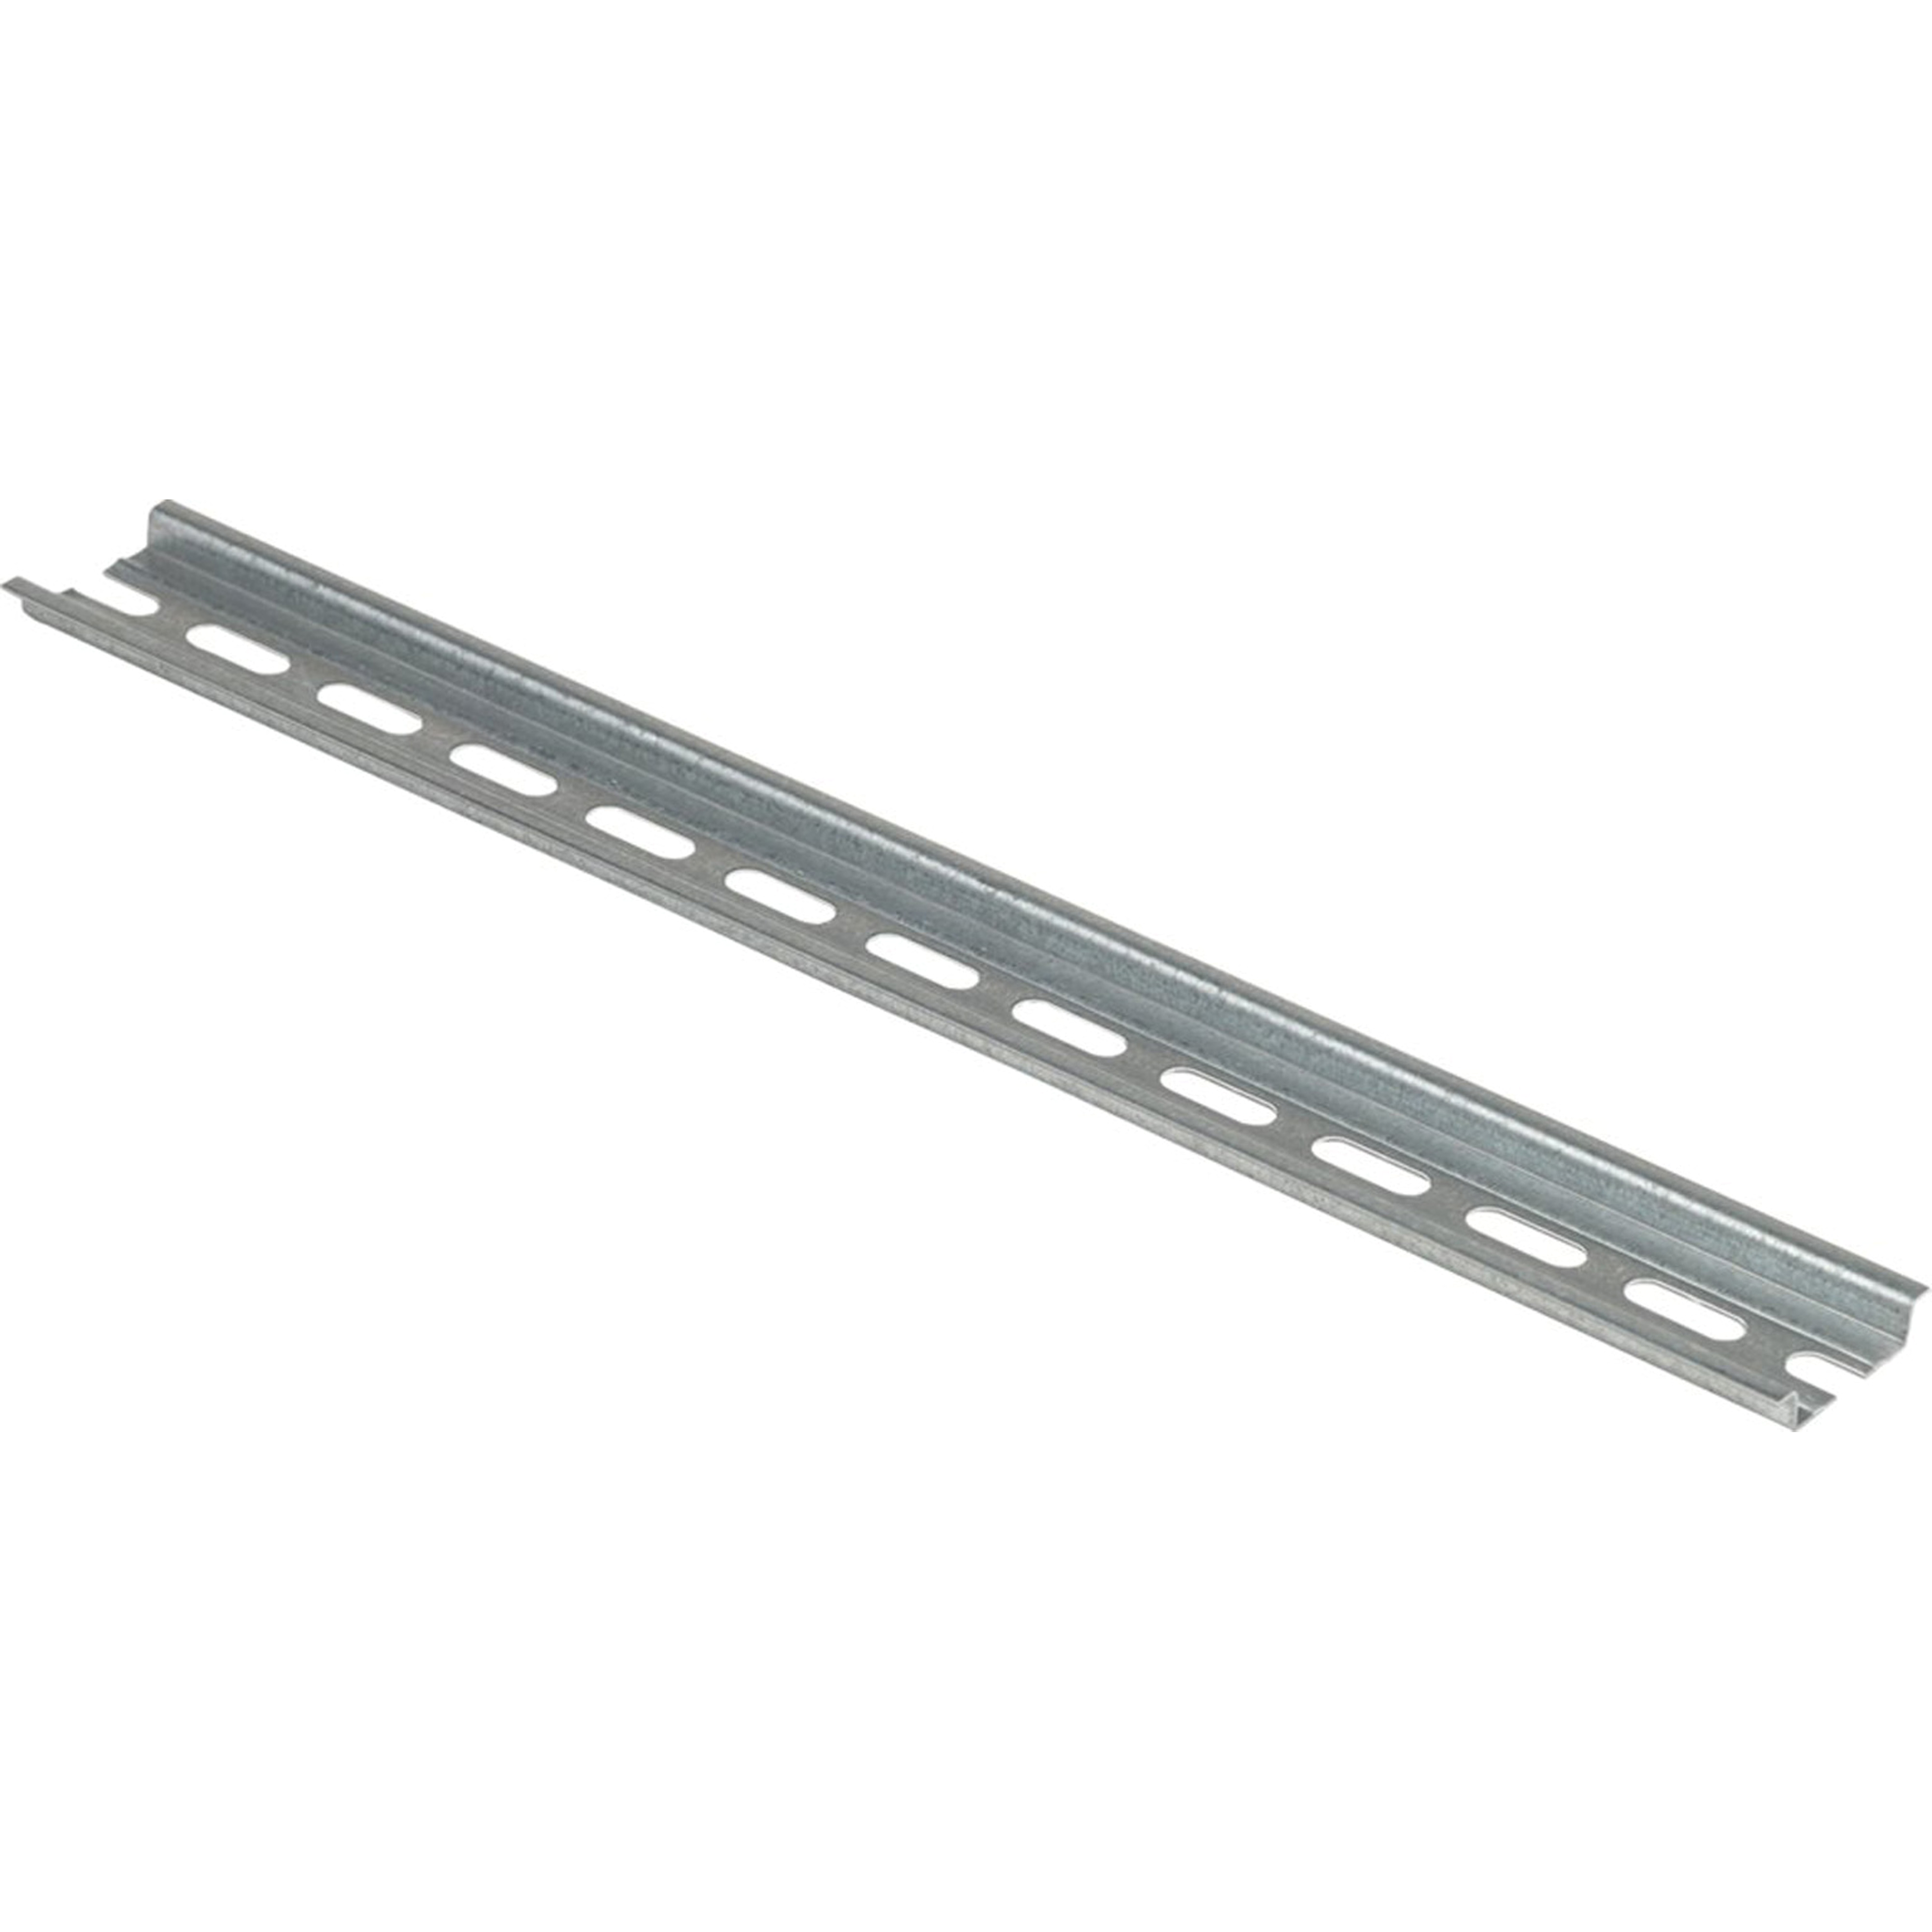 Terminal block, Linergy, mounting track, 35 mm DIN rail, with slotted mounting holes, 9 inches long